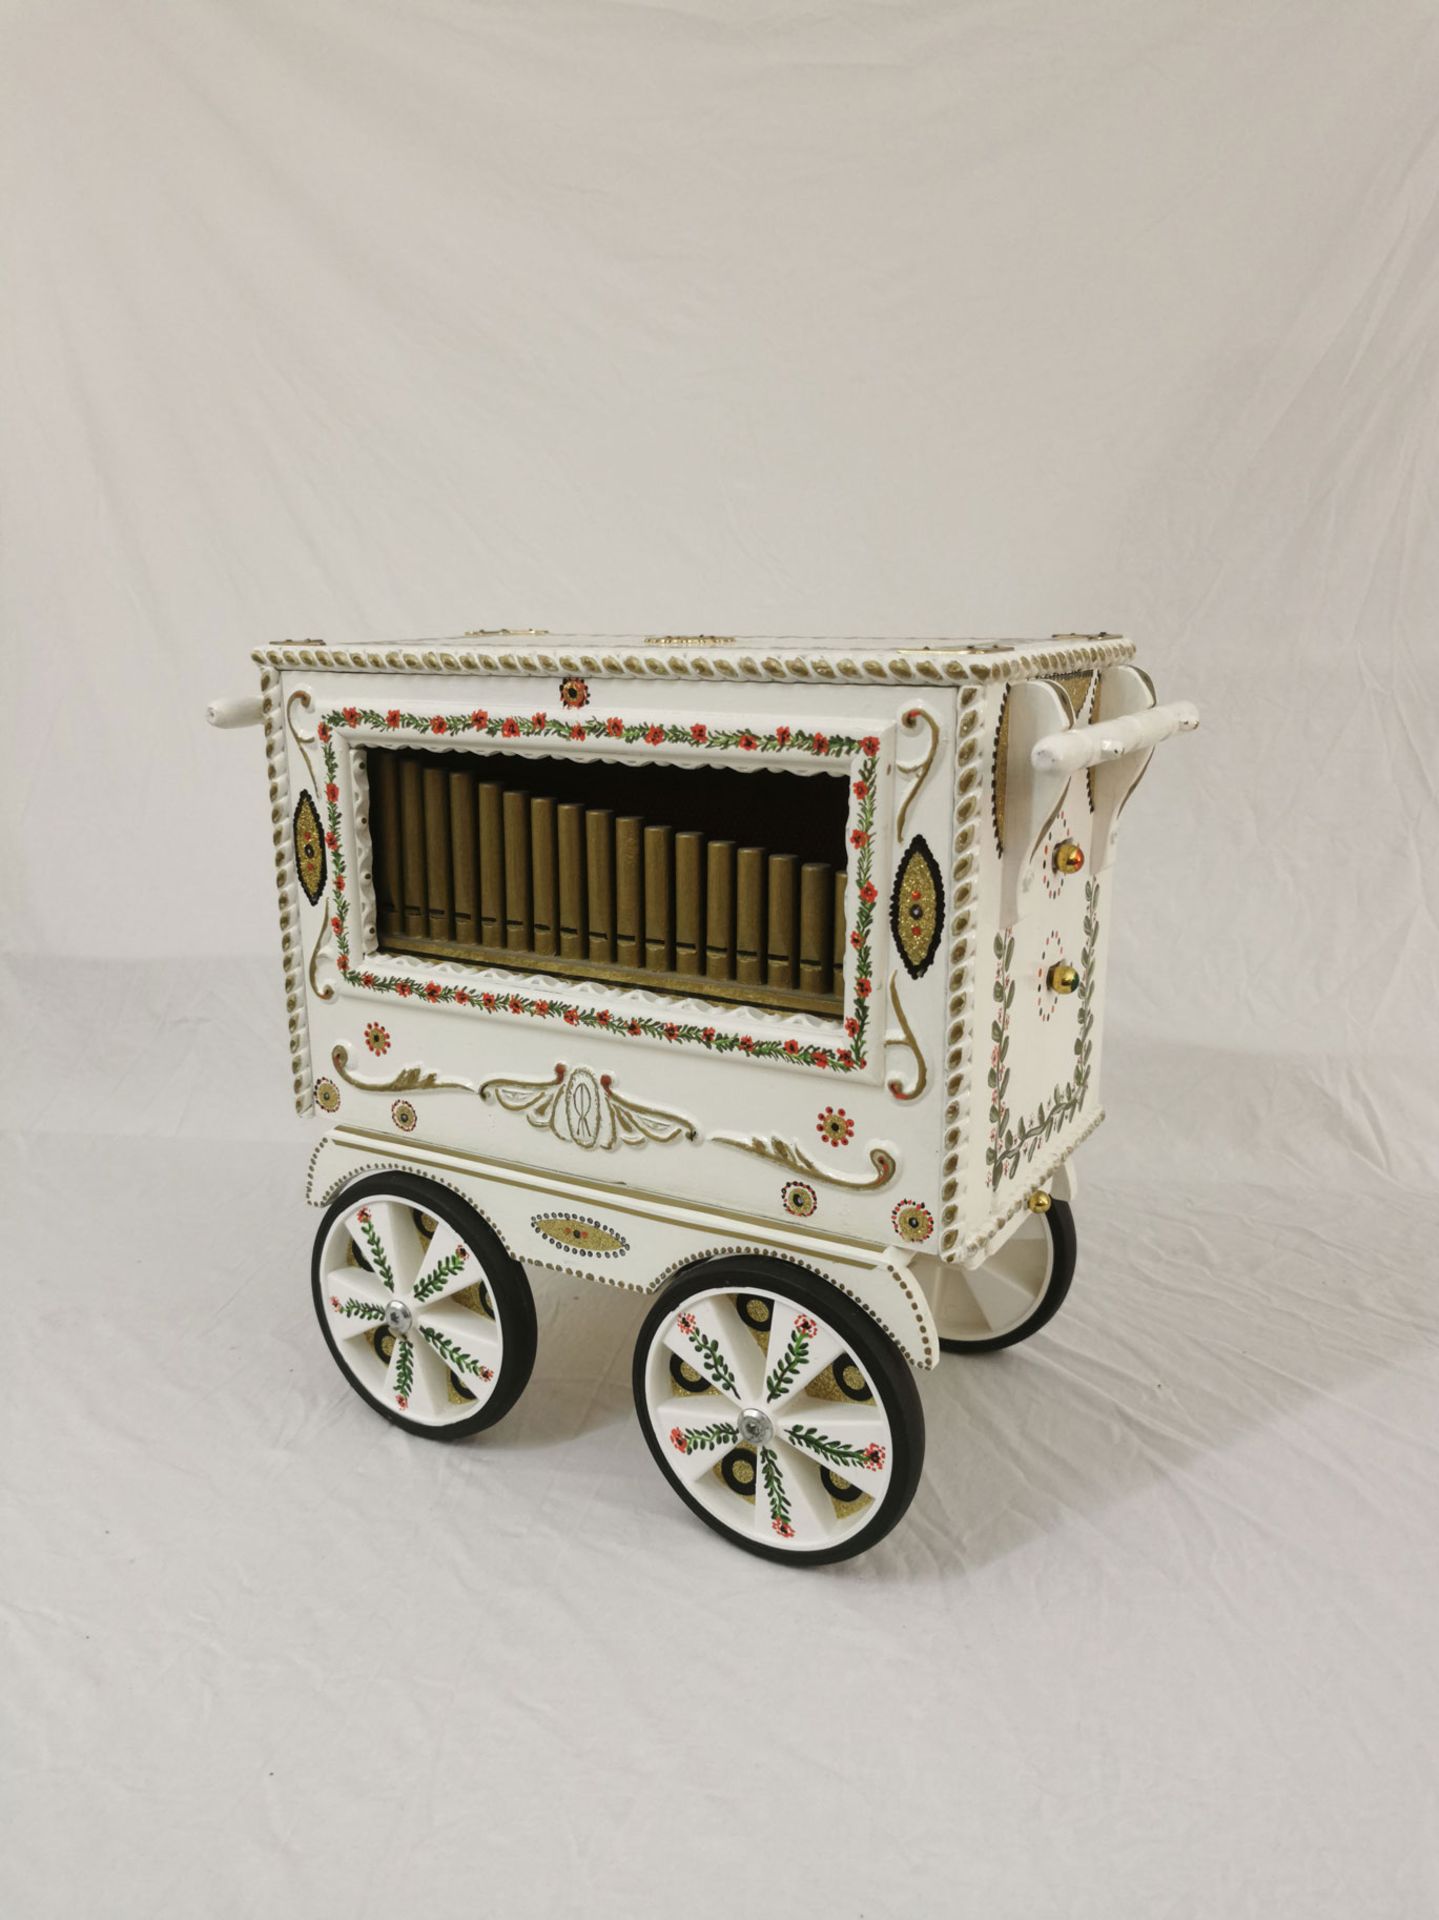 White Barrel Organ Scale Model with Cassette Player